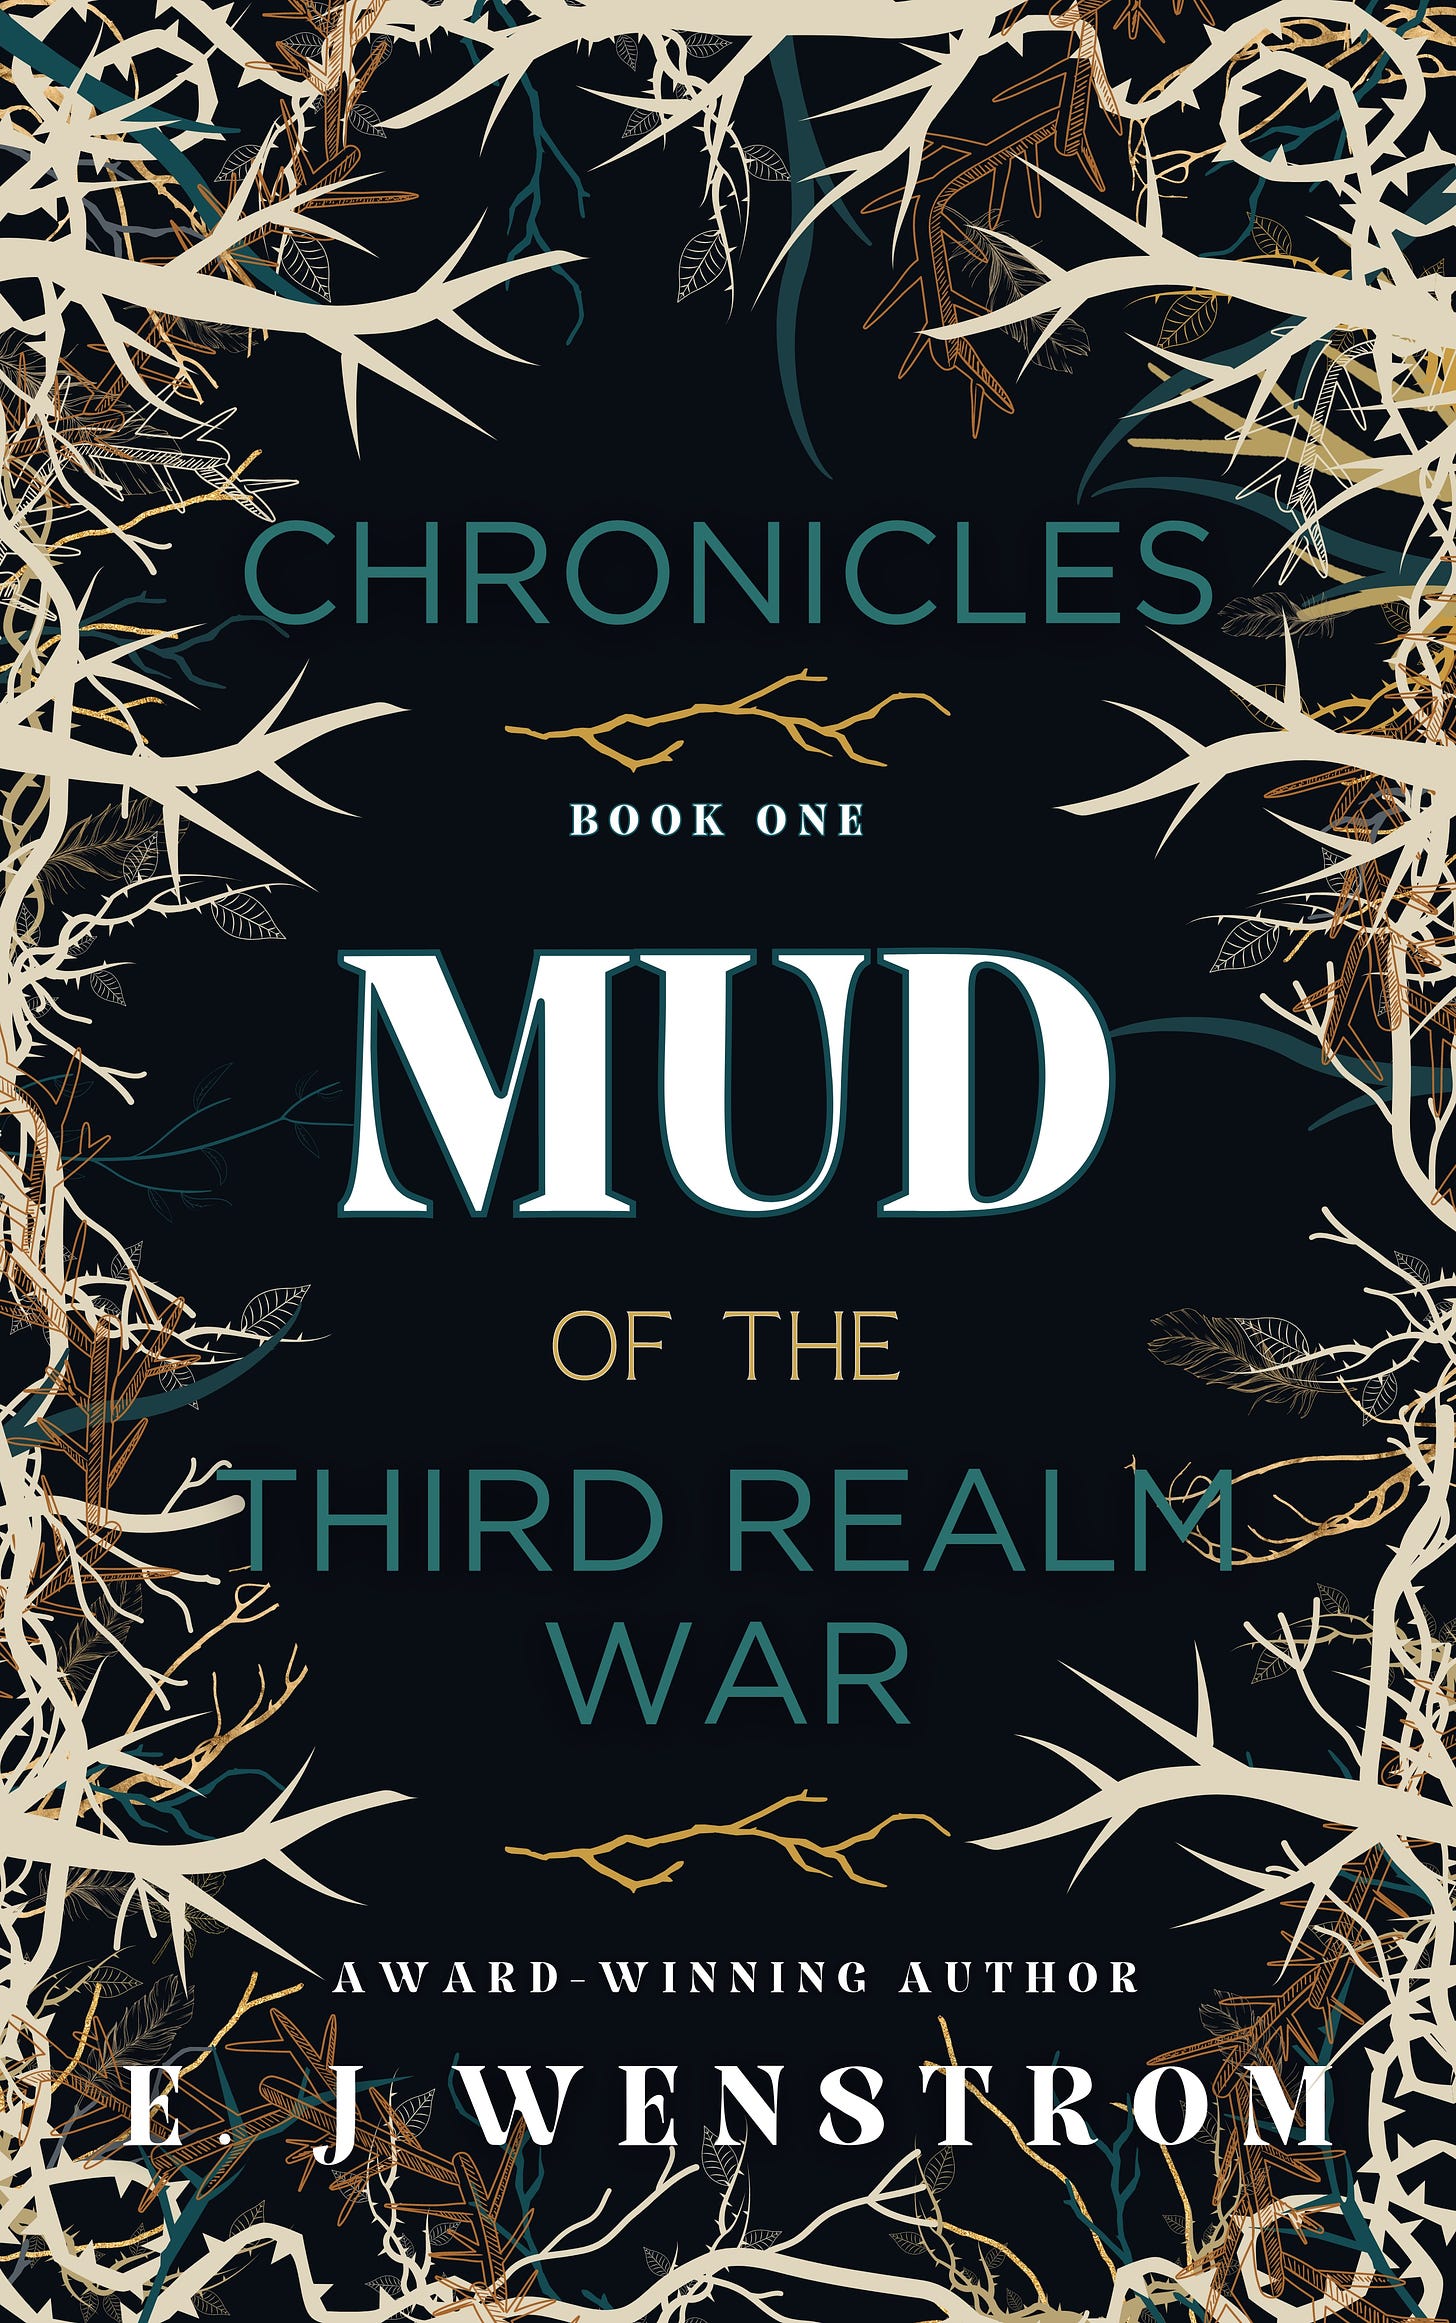 cover for mud, chronicles of the third realm war #1